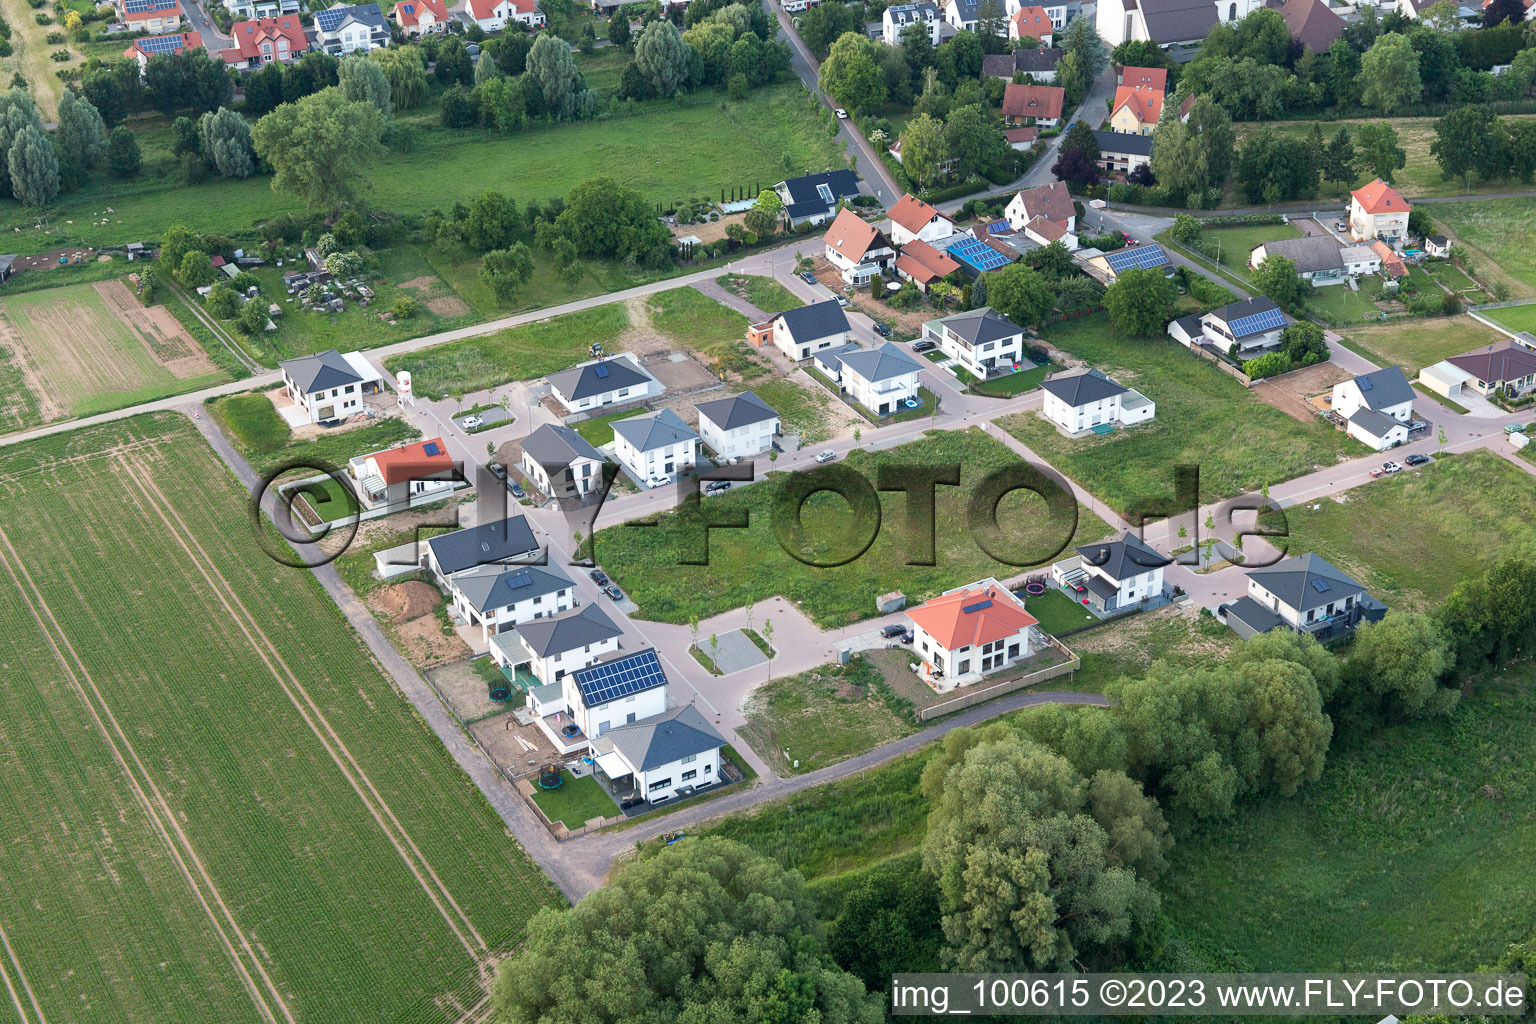 Offenbach an der Queich in the state Rhineland-Palatinate, Germany out of the air